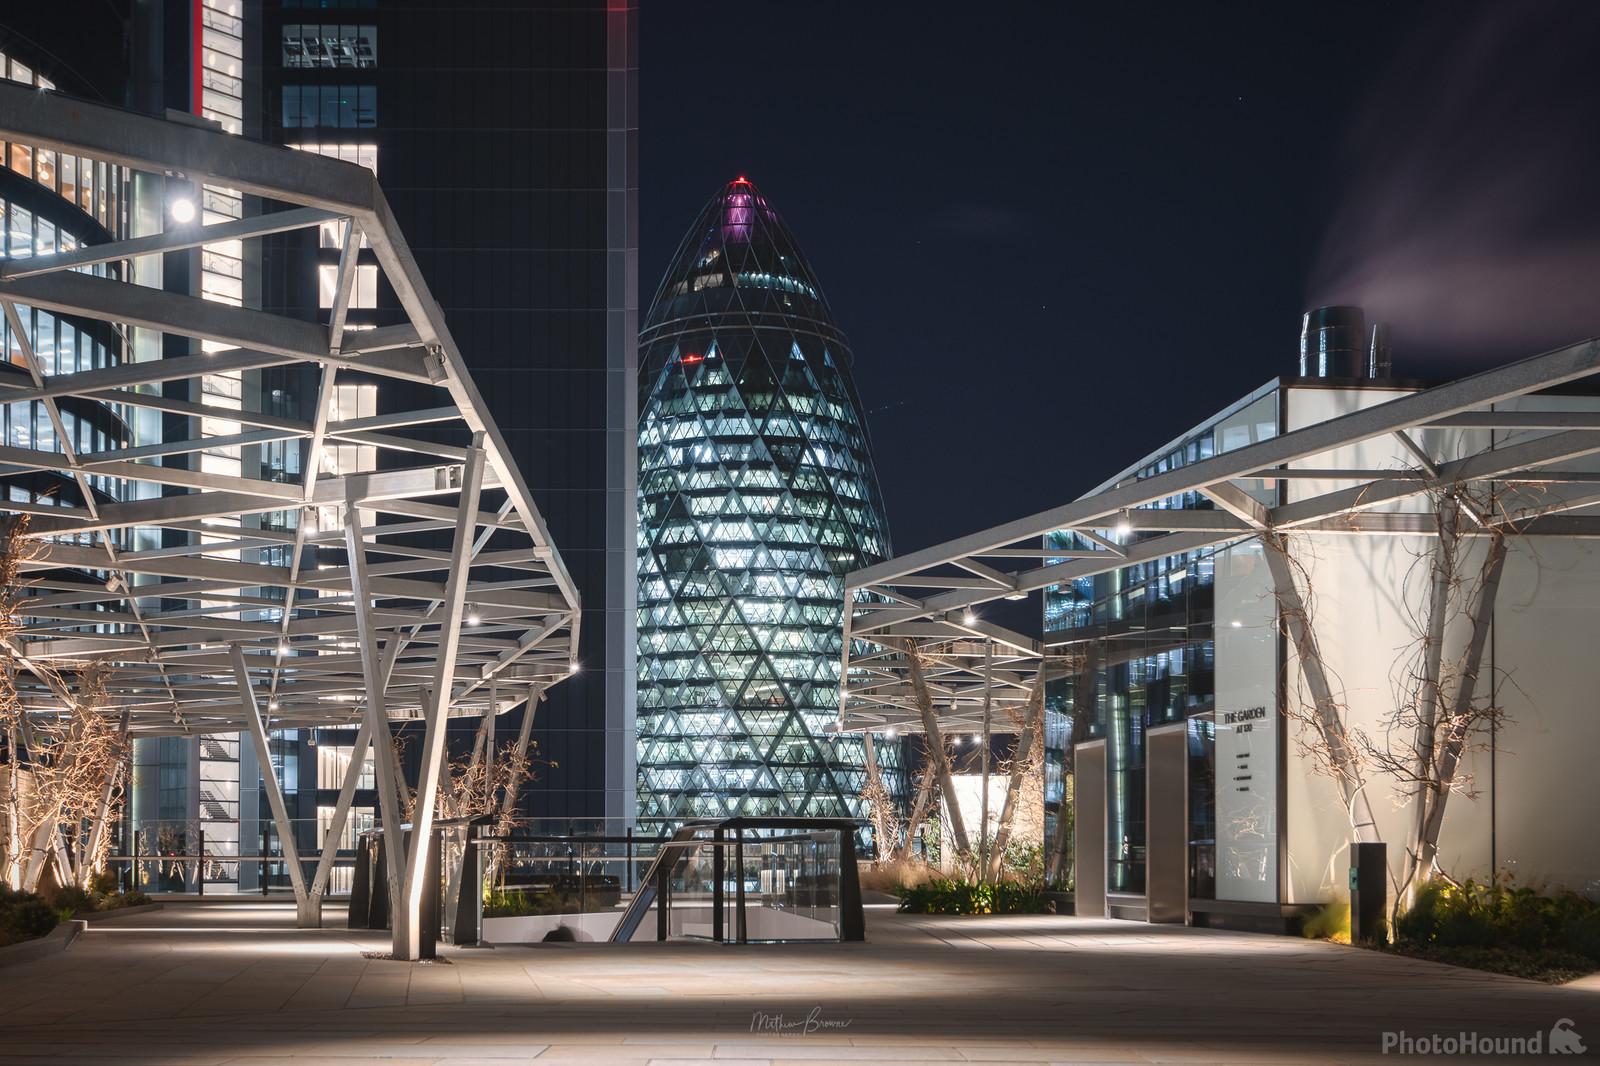 Image of 120 Fenchurch Street Roof Garden by Mathew Browne